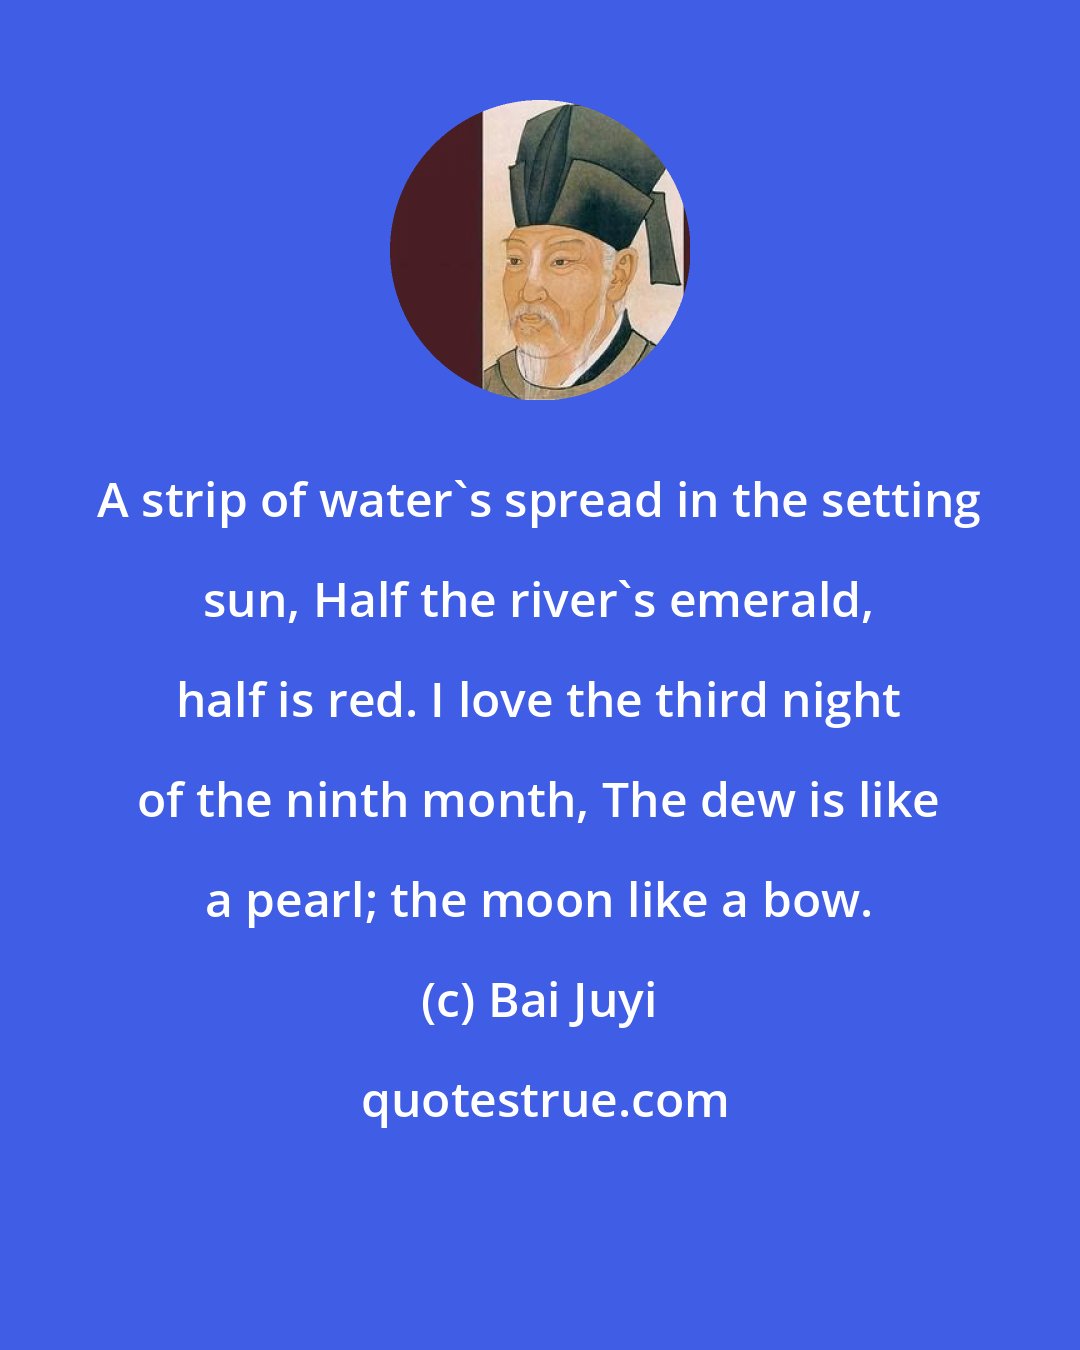 Bai Juyi: A strip of water's spread in the setting sun, Half the river's emerald, half is red. I love the third night of the ninth month, The dew is like a pearl; the moon like a bow.